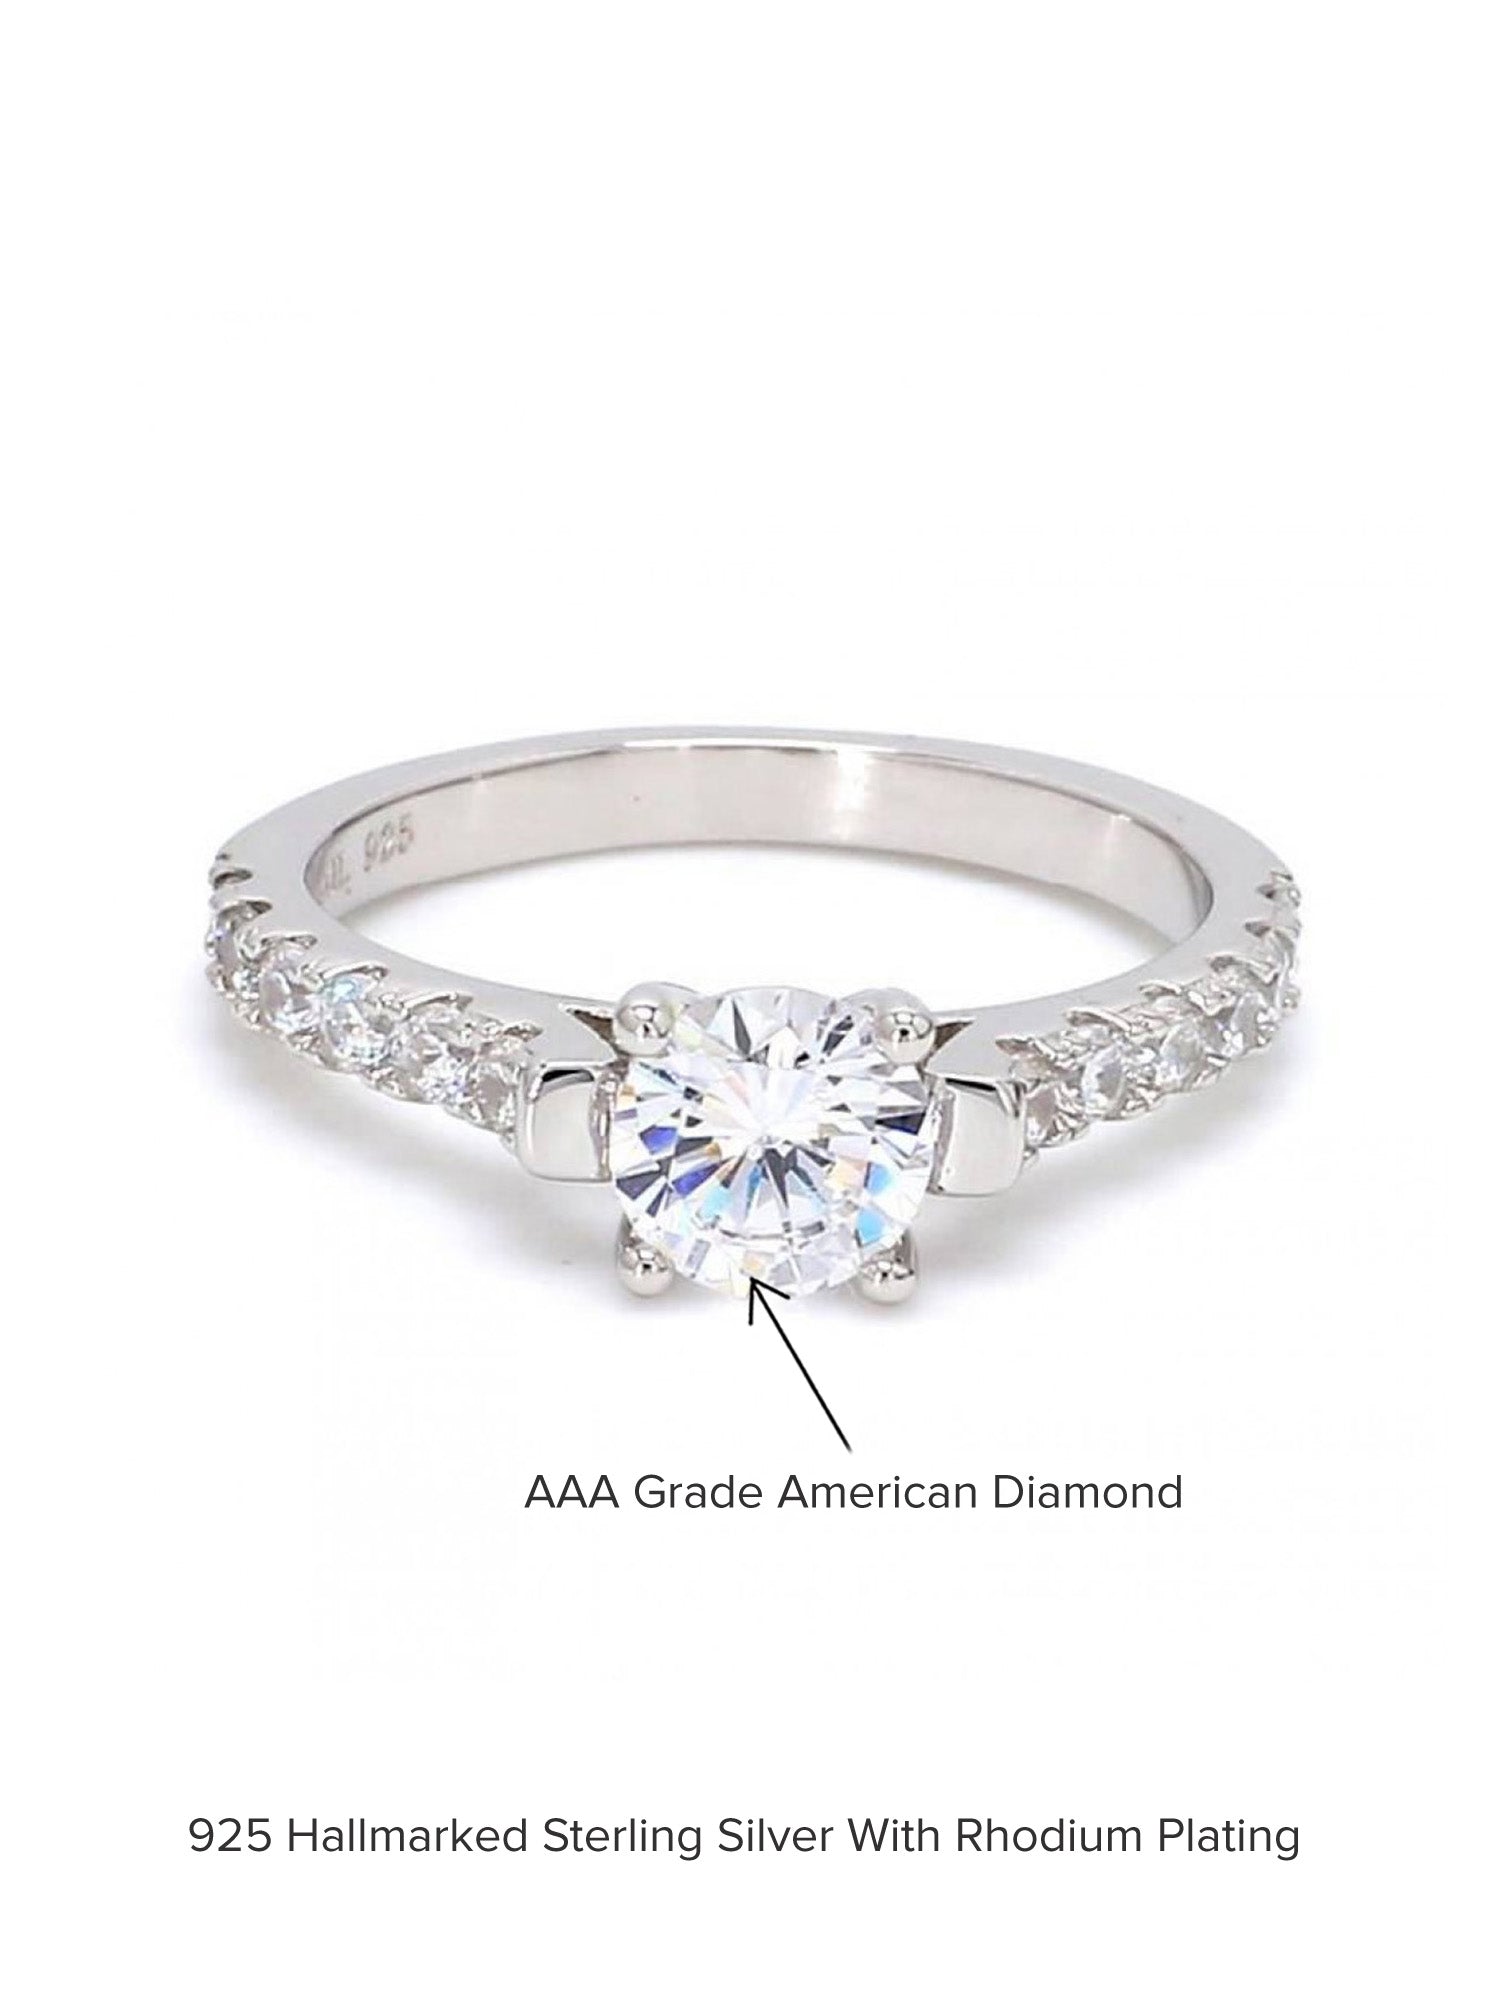 ORNATE 1 CARAT SOLITAIRE STORY RING FOR WOMEN-5